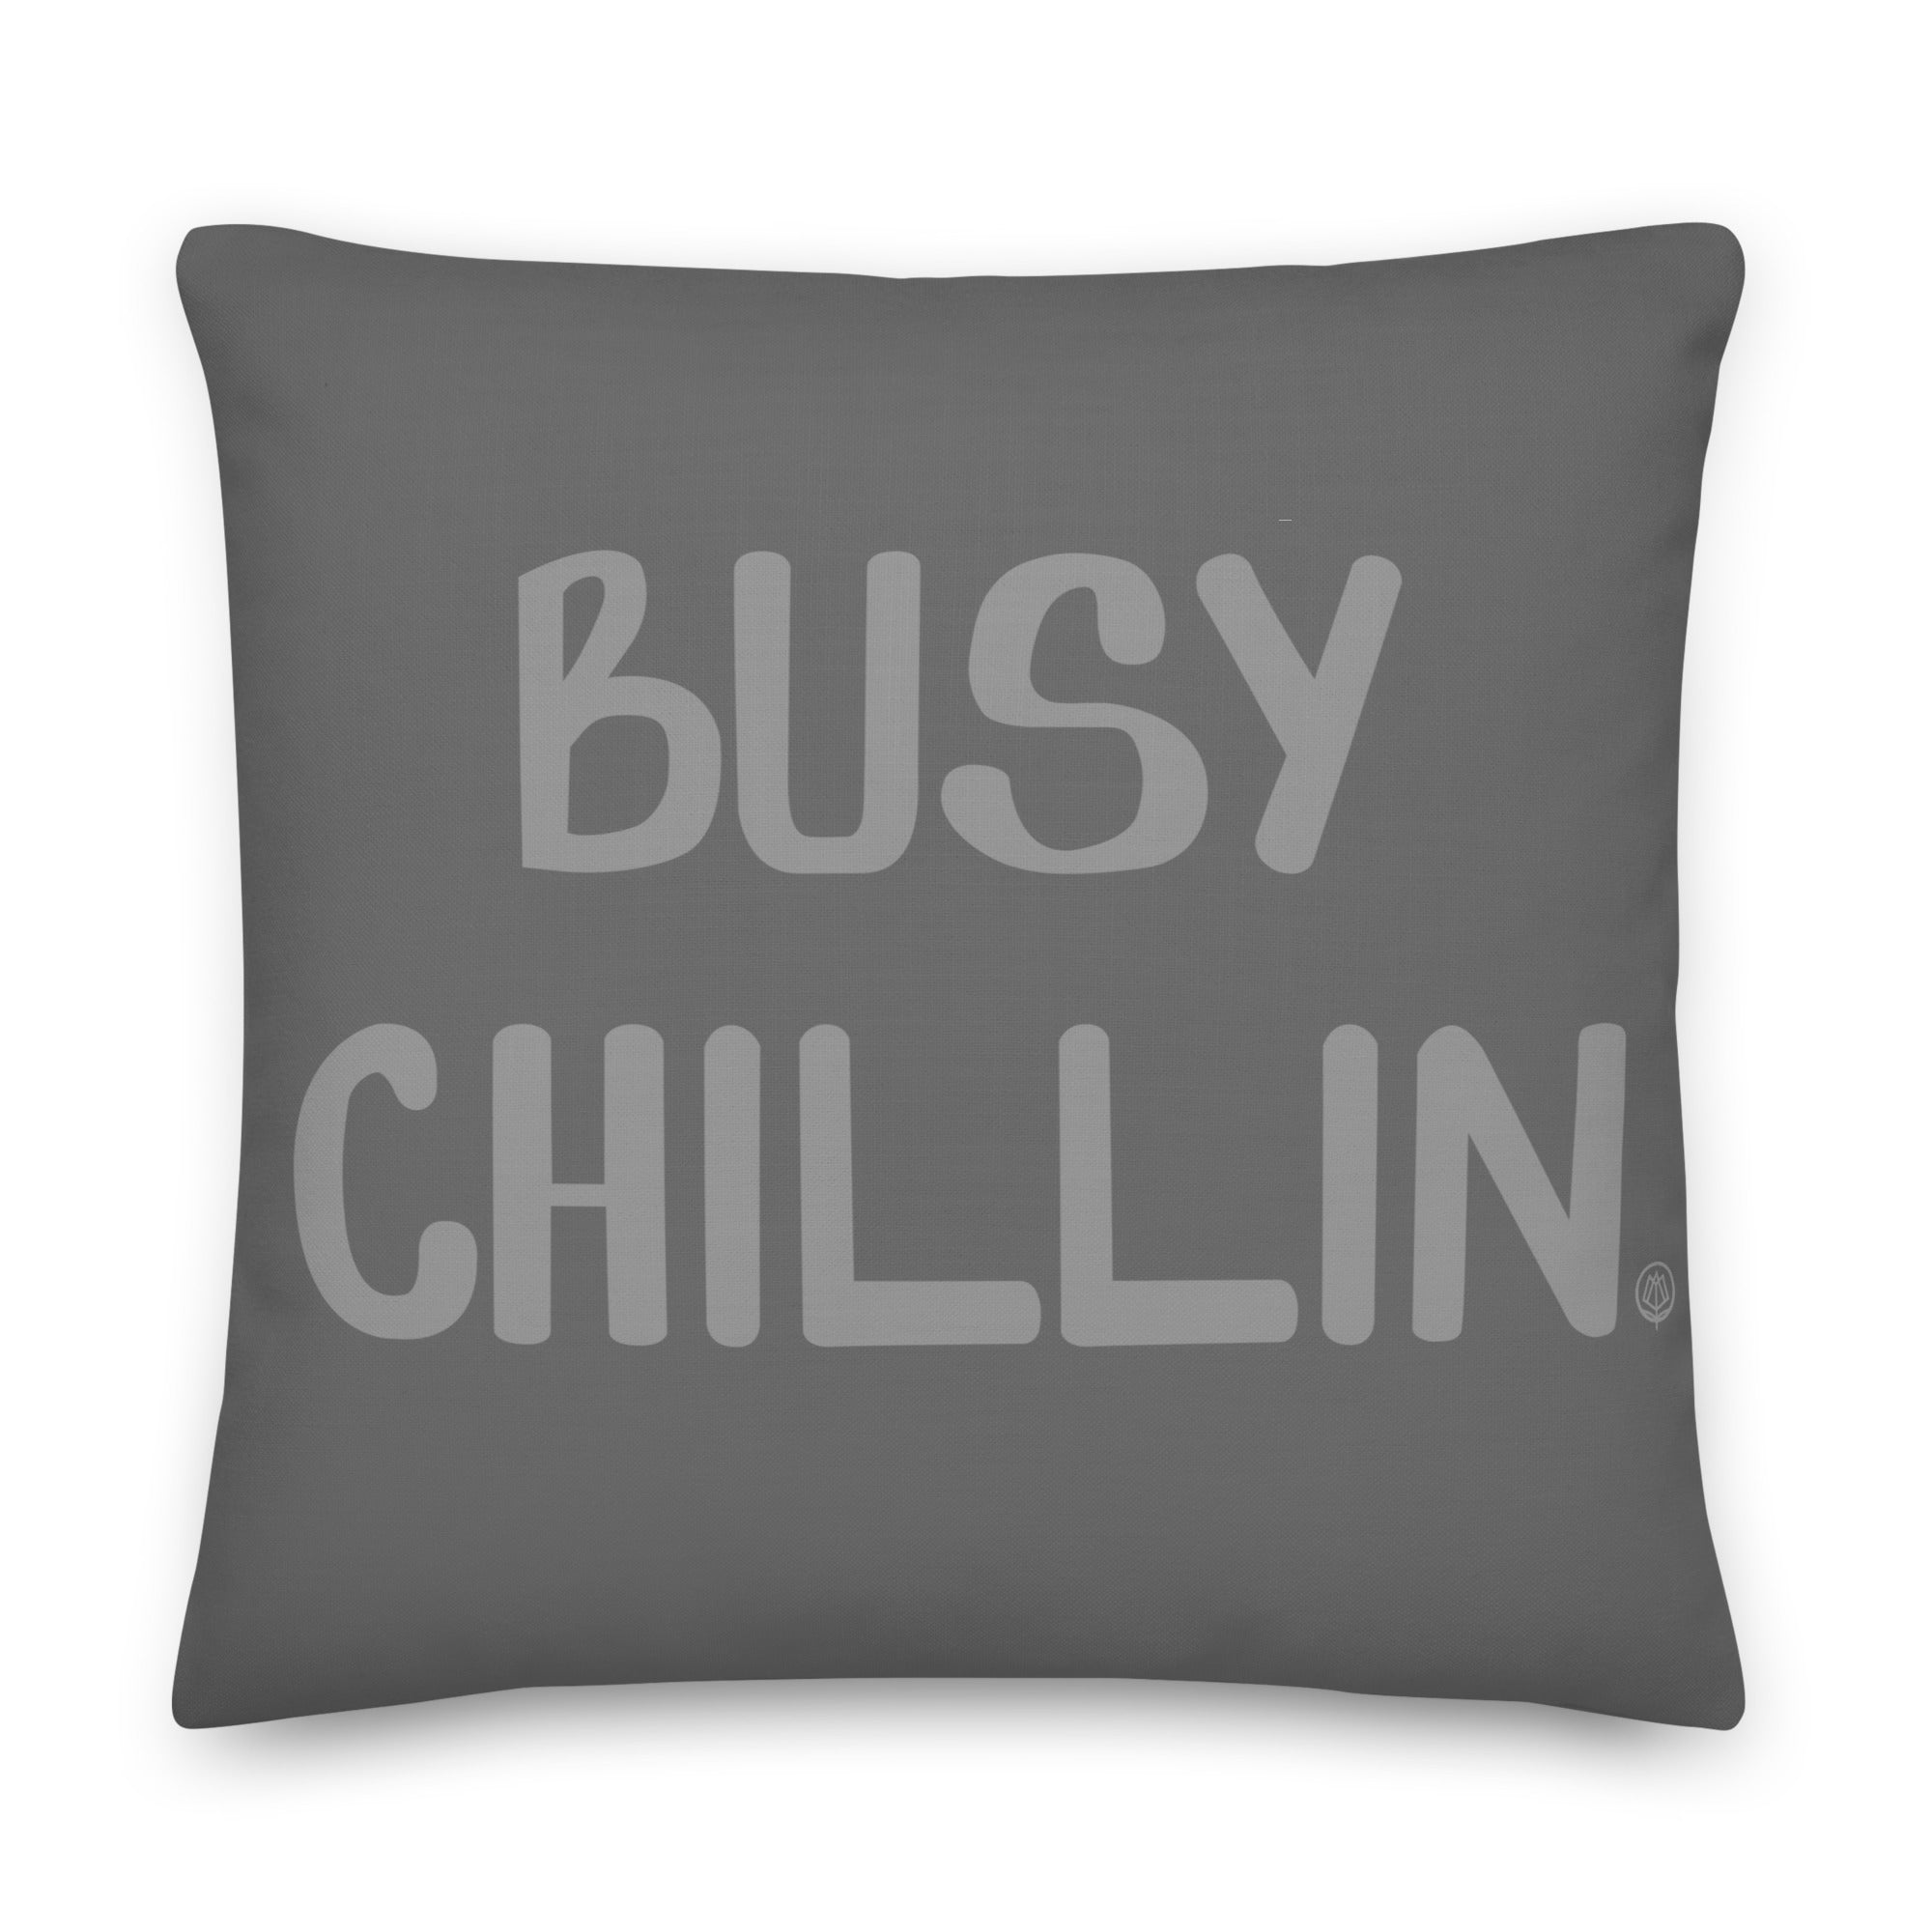 Busy Chillin Pillow - Grey